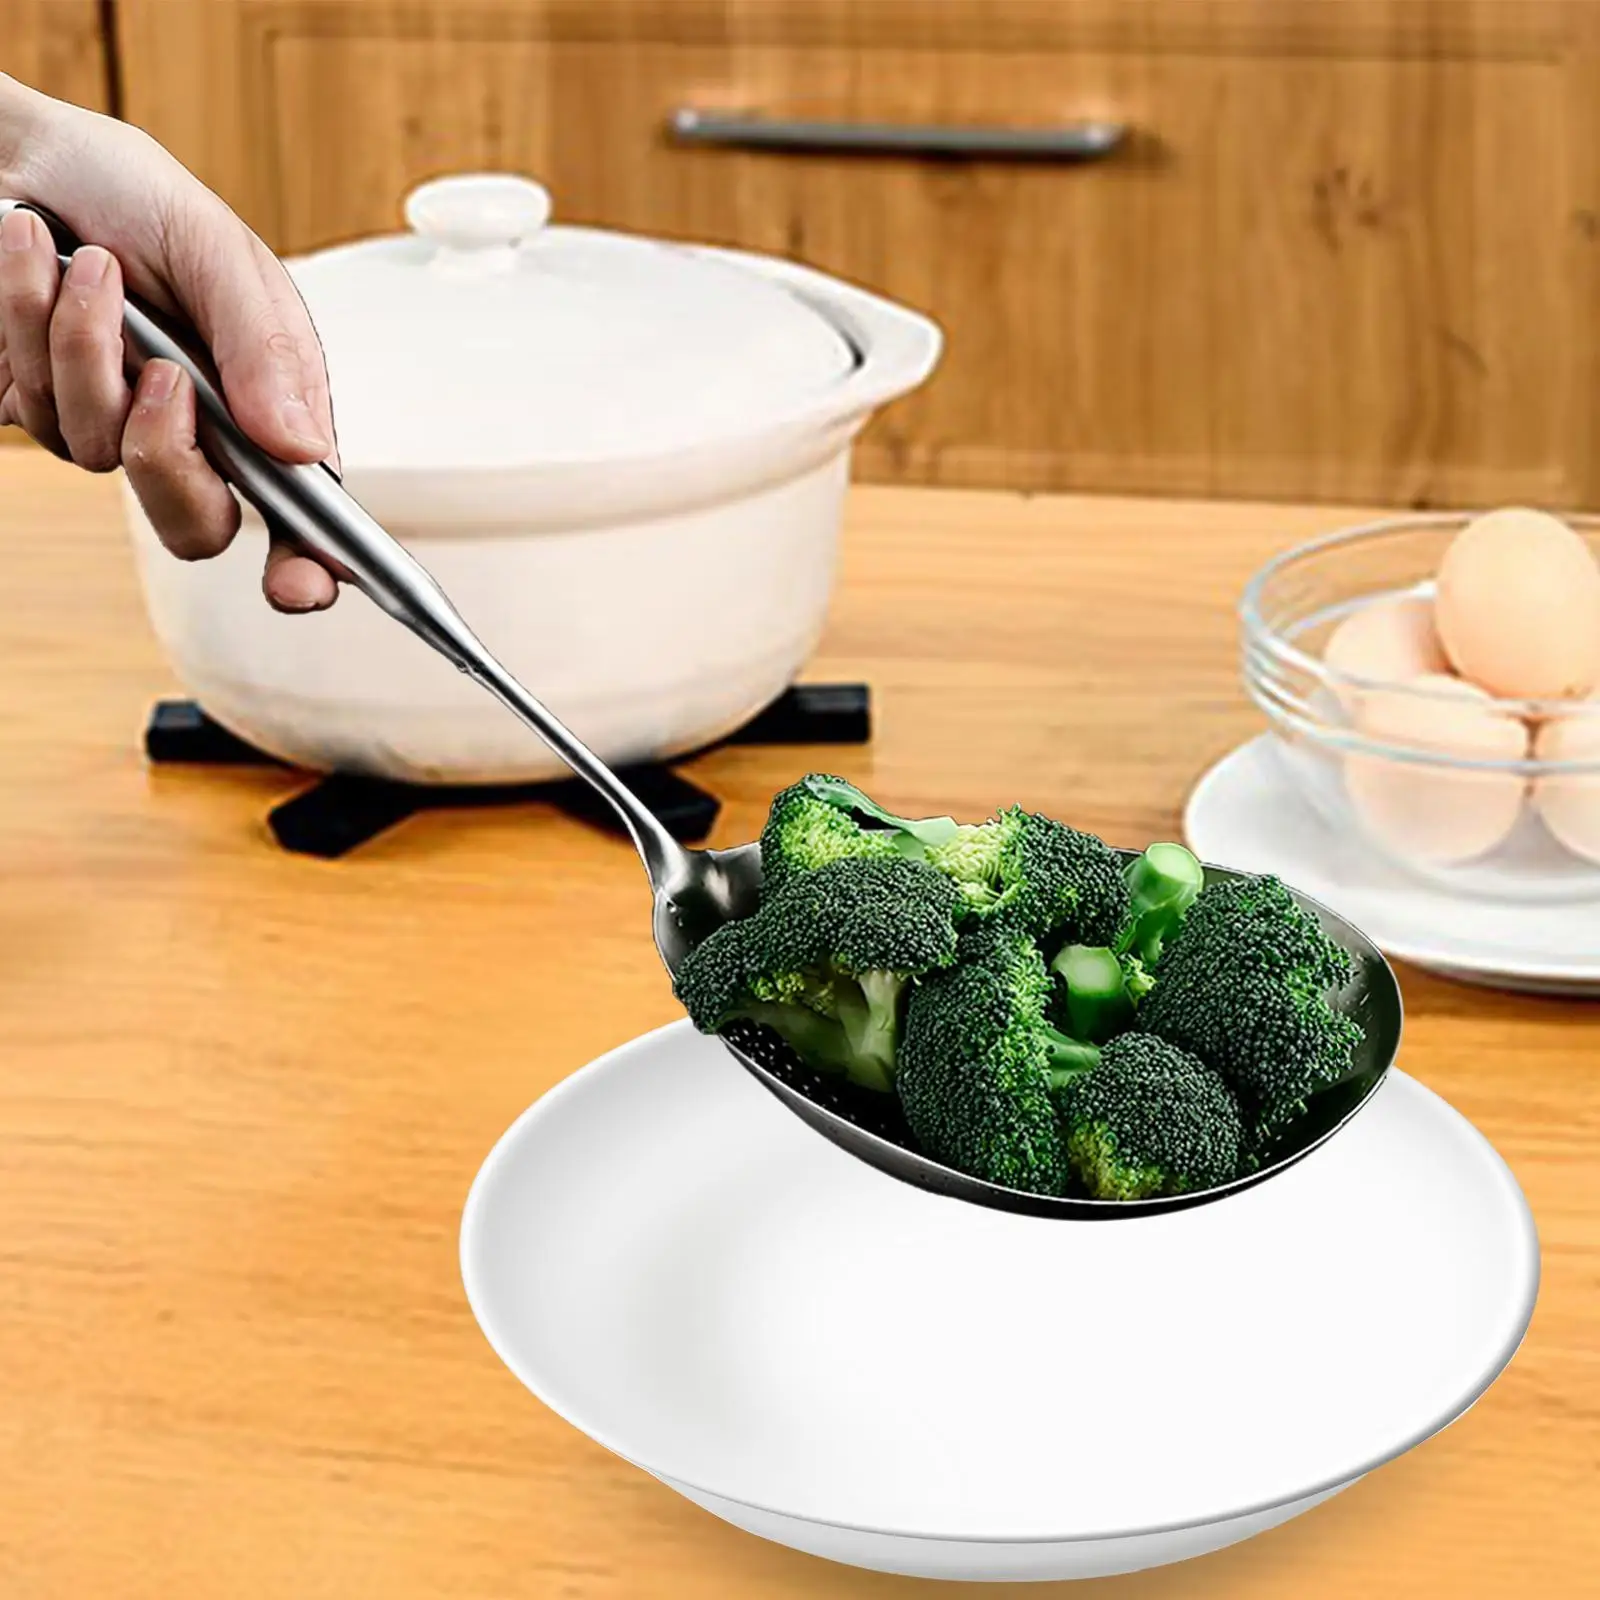 Professional Skimmer Slotted Spoon Durable Food Strainer Ladle Cooking Colander Spoon for Scooping Draining Noodles Pasta Frying